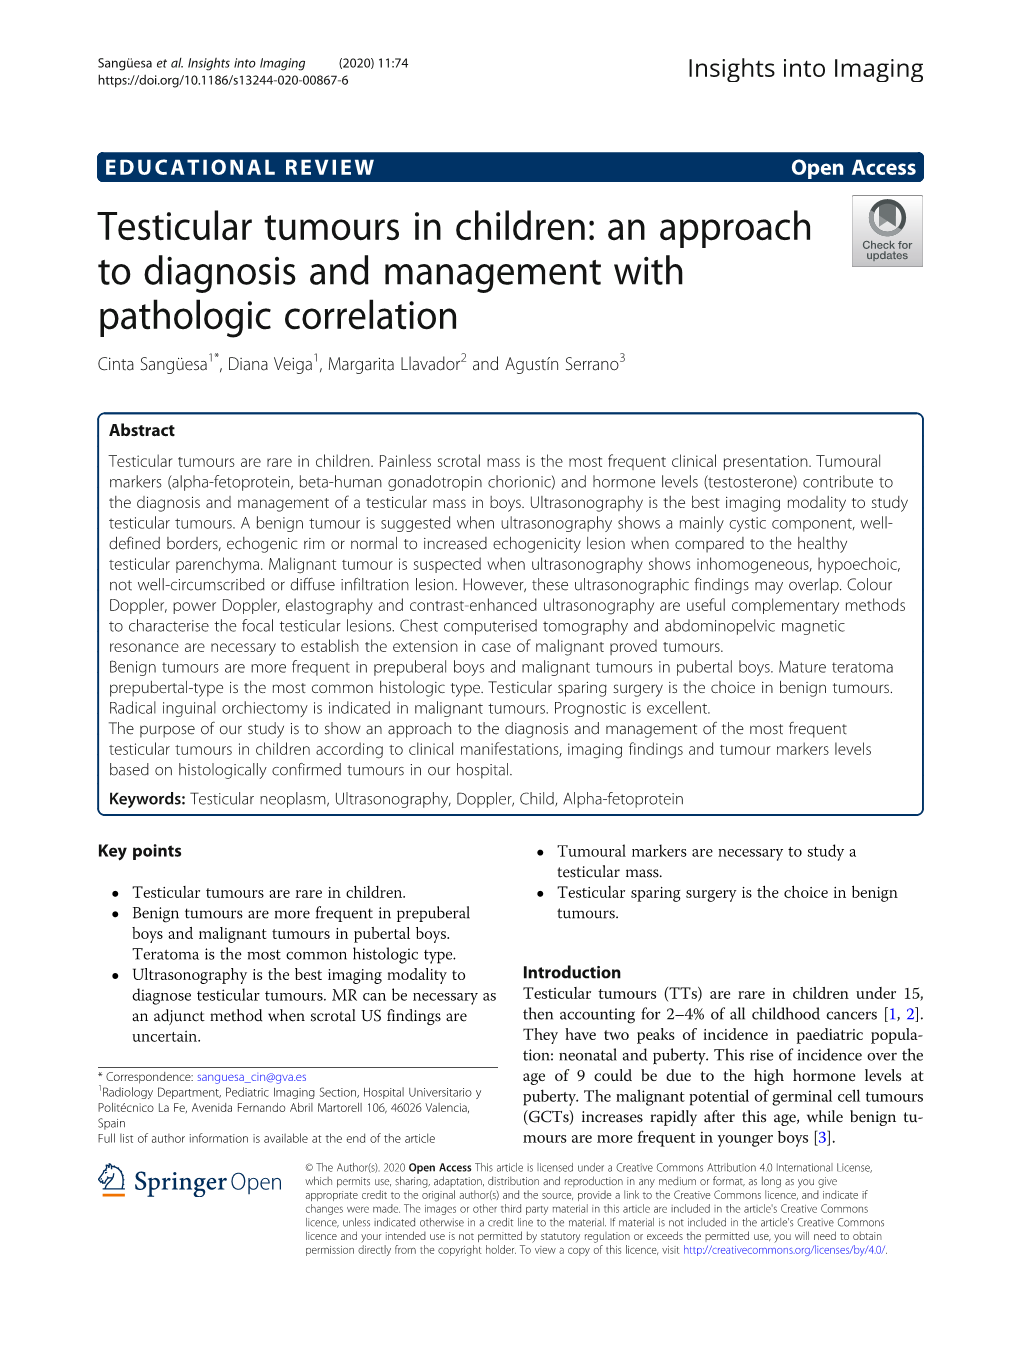 Testicular Tumours in Children: an Approach to Diagnosis And